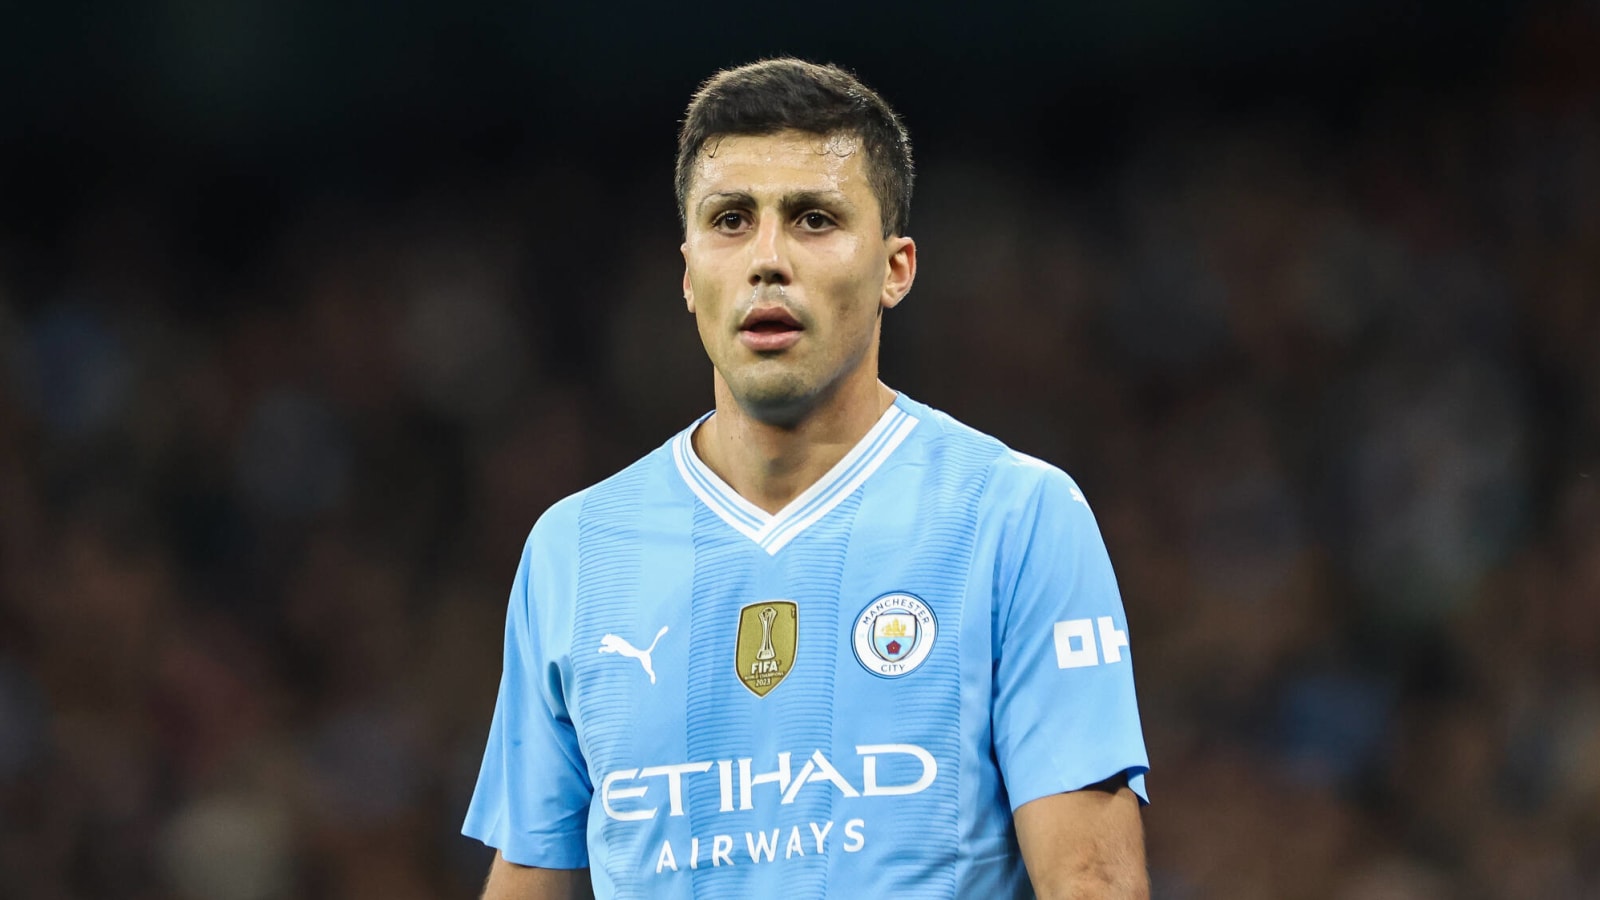 Rodri once again shows his immense value to lift Manchester City to a vital victory over Aston Villa